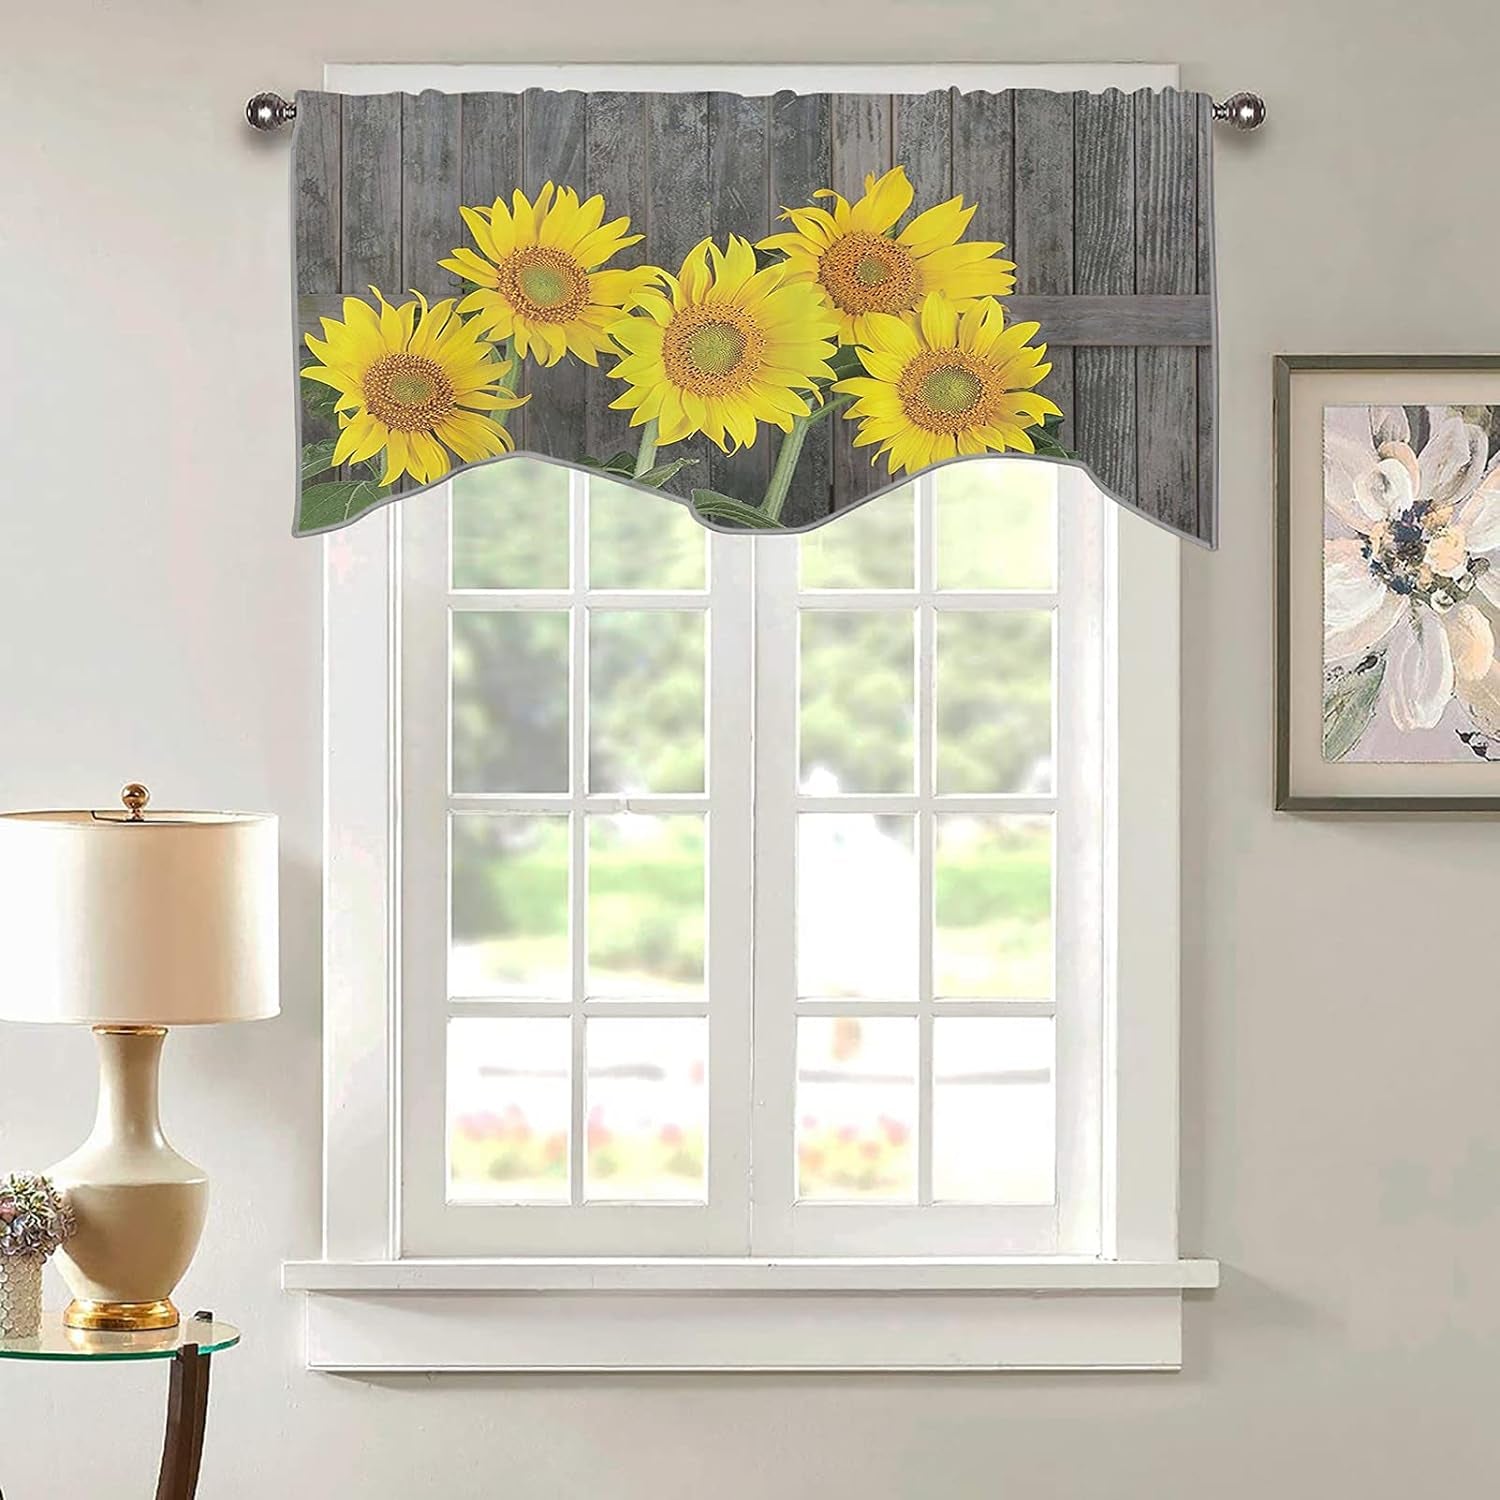 Sunflower Scalloped Window Valance Curtains - Helianthus Sunflowers Energy Rod Pocket Treatment Tier Curtain for Kitchen/Bathroom, Brown Yellow Green, (W36 Inch X L18 Inch, K91 X H46Cm)